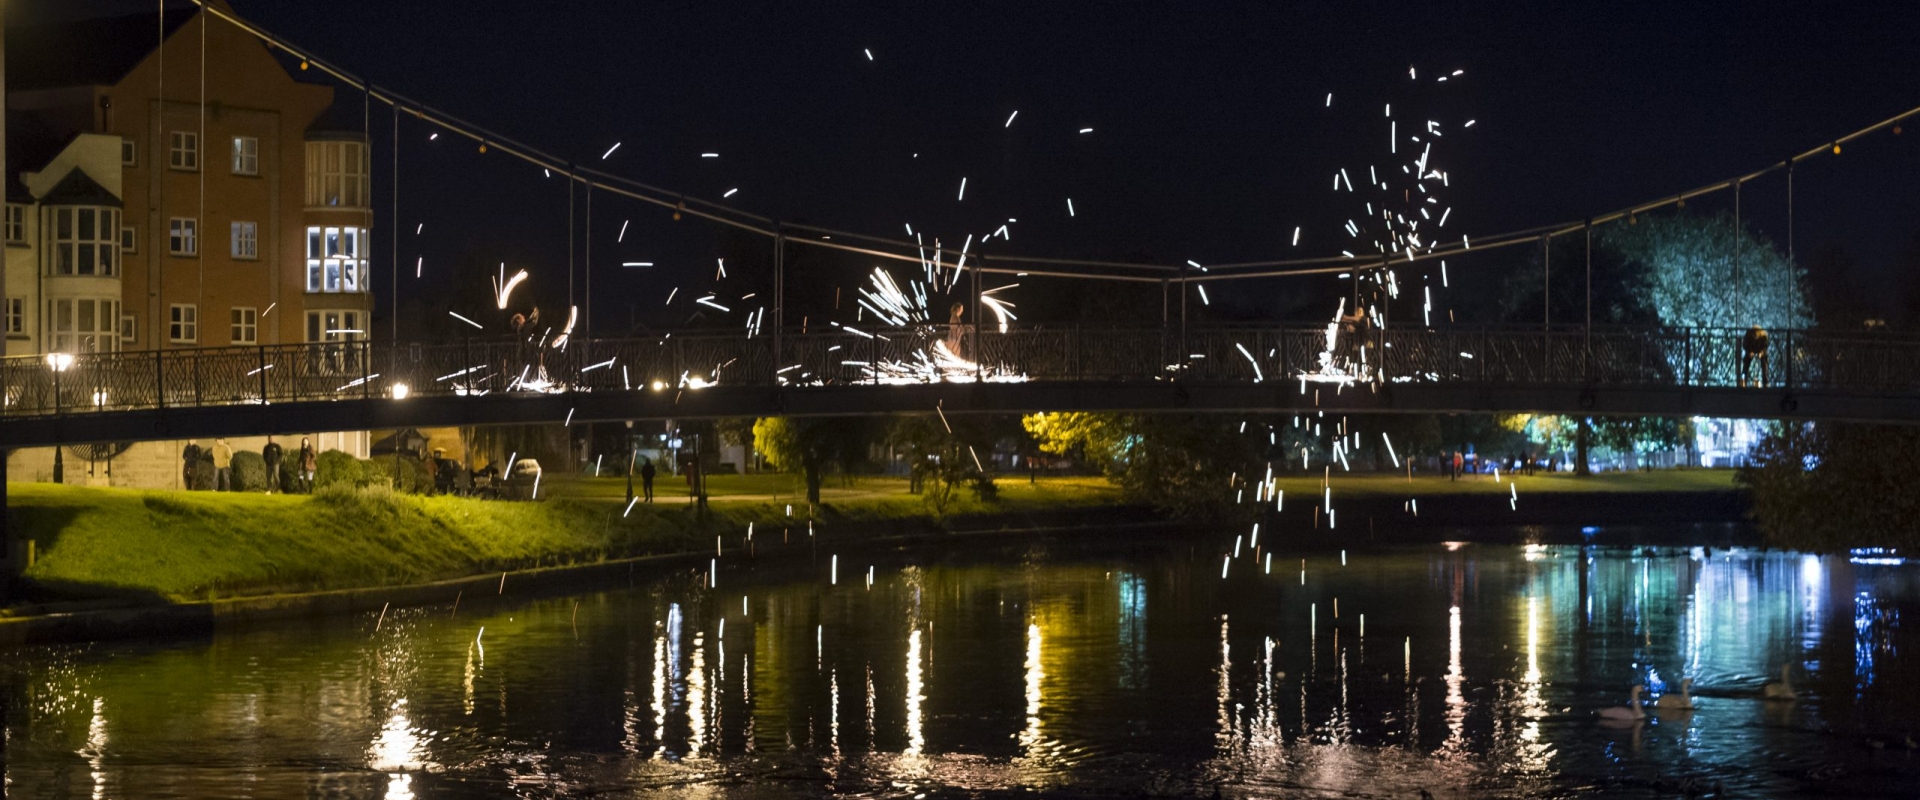 On a bridge over Exeter canal, fire spinners perform, sparks flying off into the night sky.